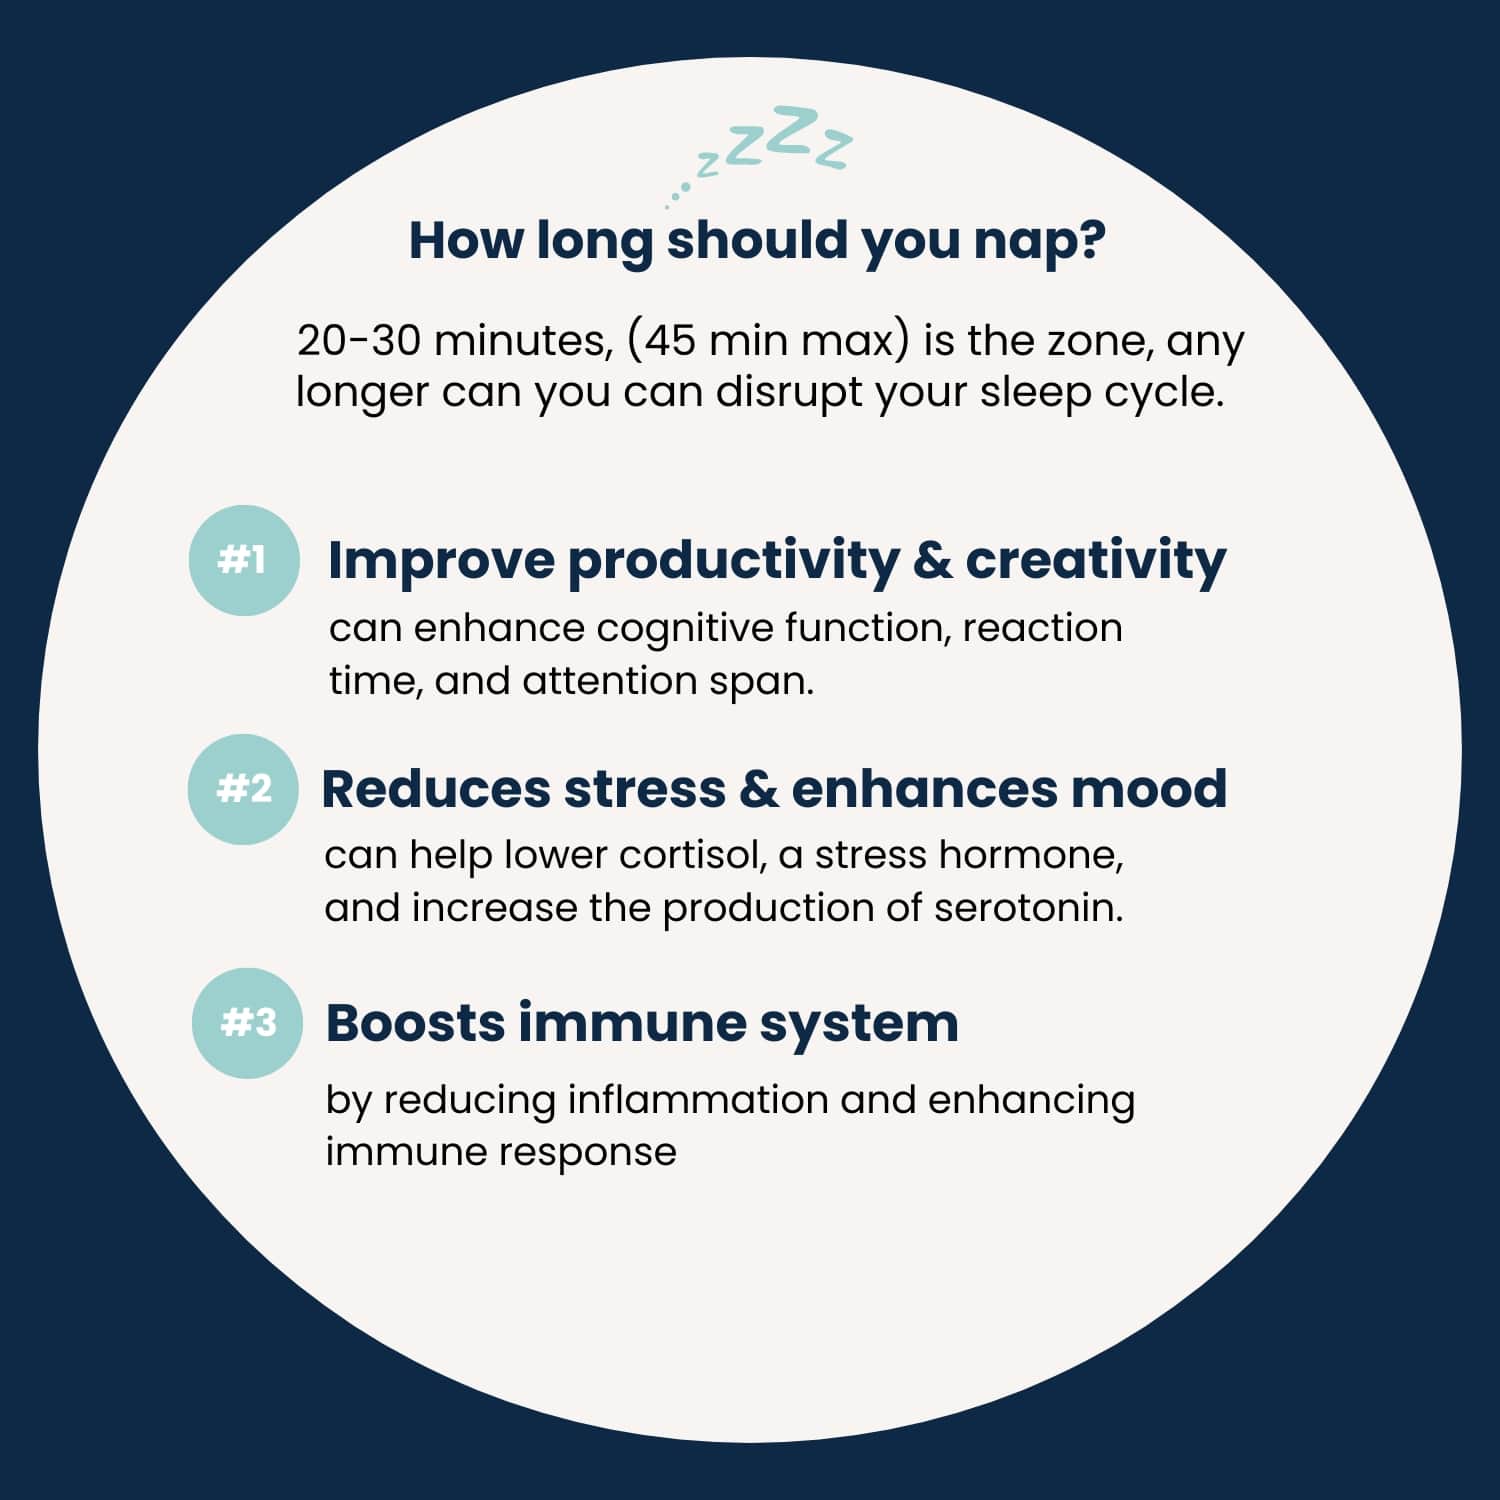 Infographic detailing optimal nap duration for health with benefits listed: 20-30 minutes recommended for enhancing productivity and creativity, reducing stress, improving mood, and boosting the immune system.